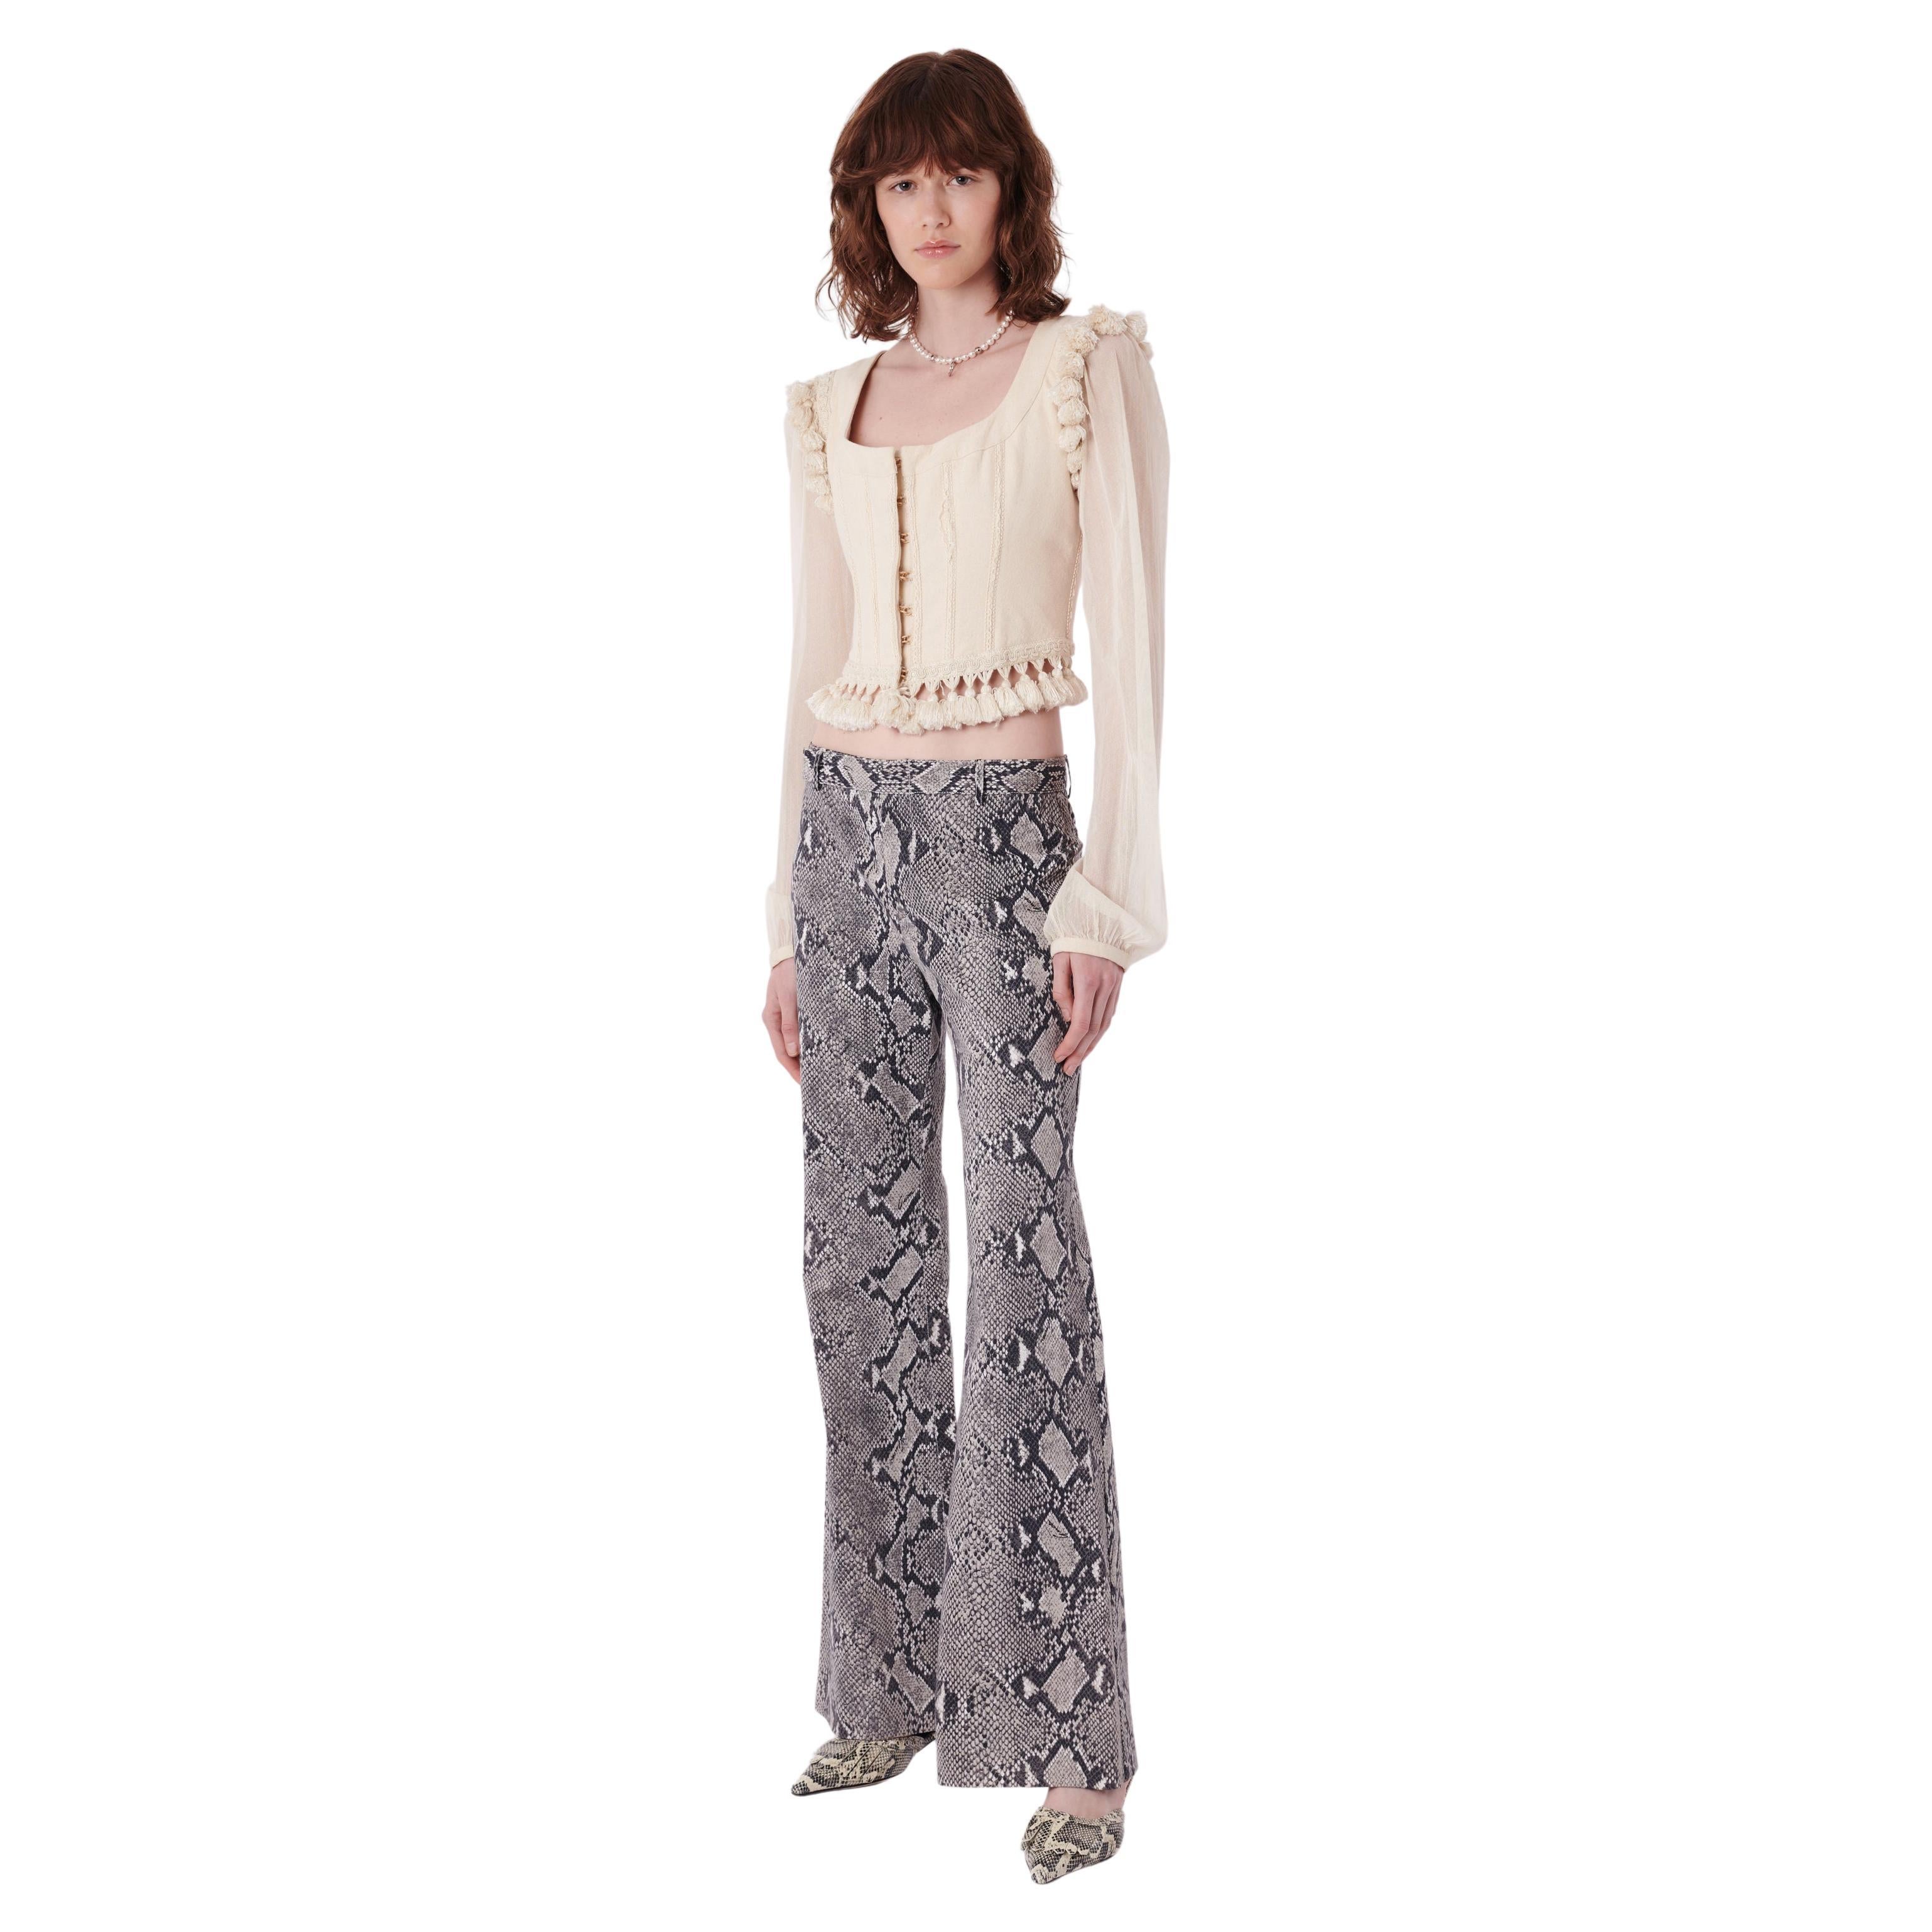 Gucci Vintage S/S 2000 Python Print Trousers For Sale